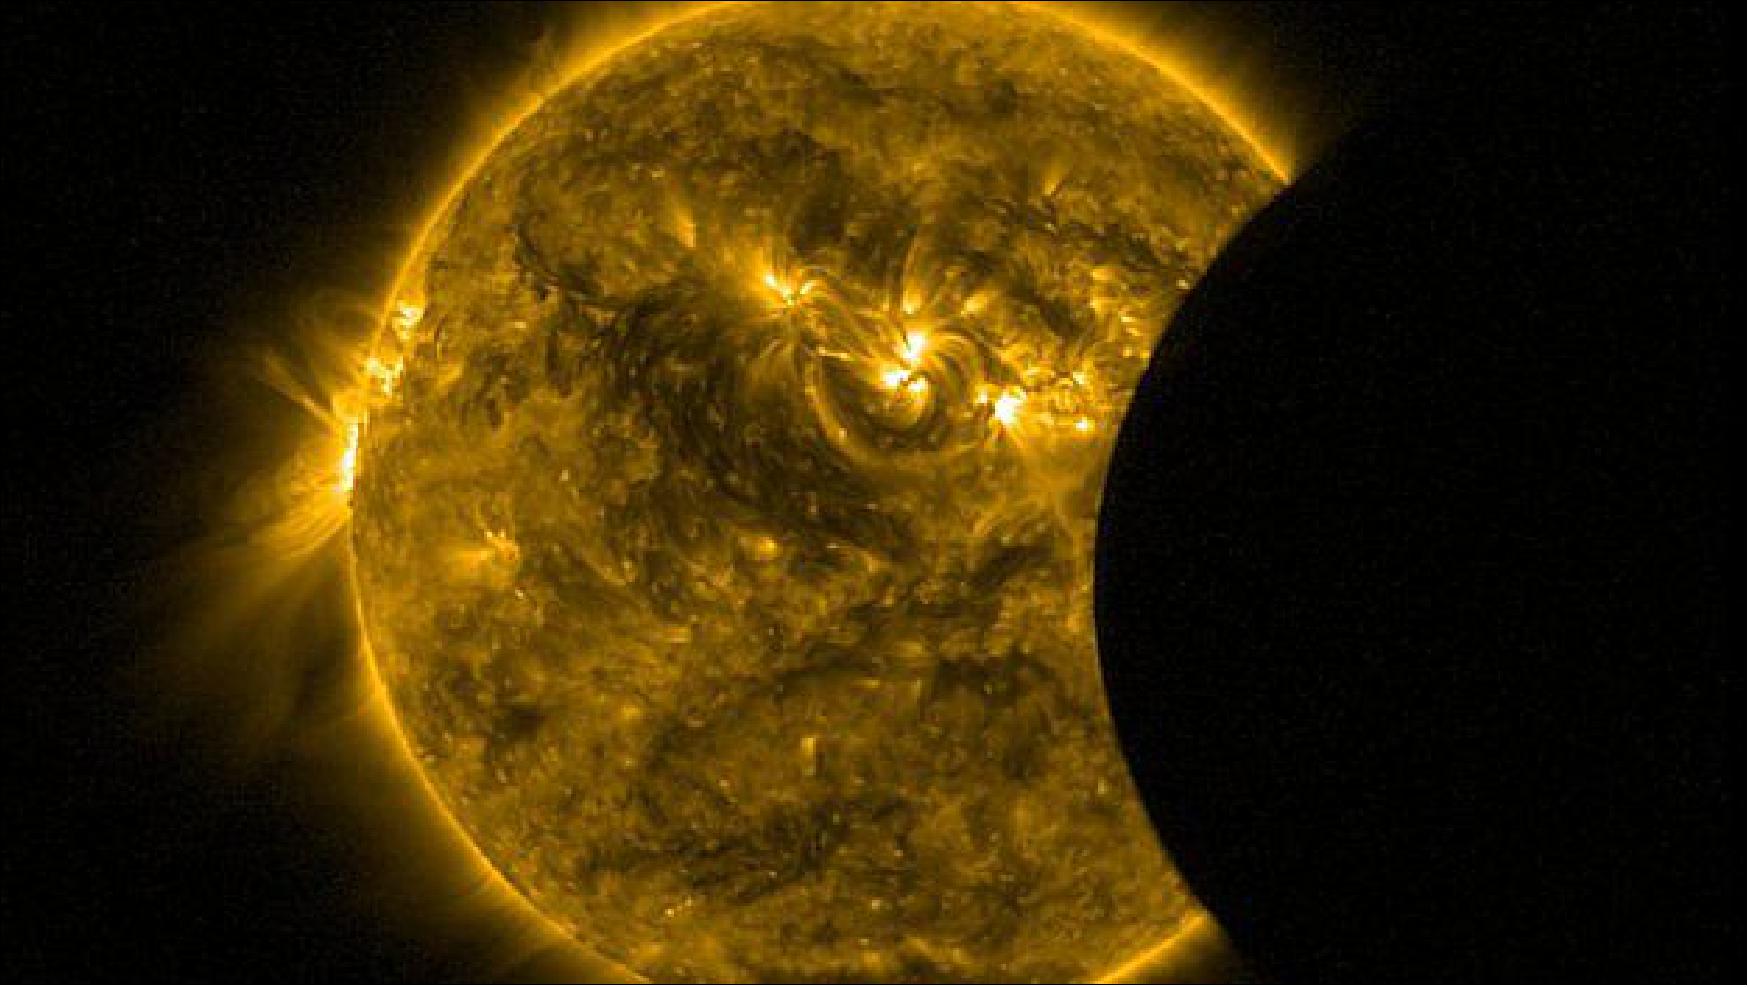 Figure 31: ESA's Sun-watching PROBA-2 minisatellite watched the Pacific's partial solar eclipse from LEO (image credit: ESA, Royal Observatory of Belgium)